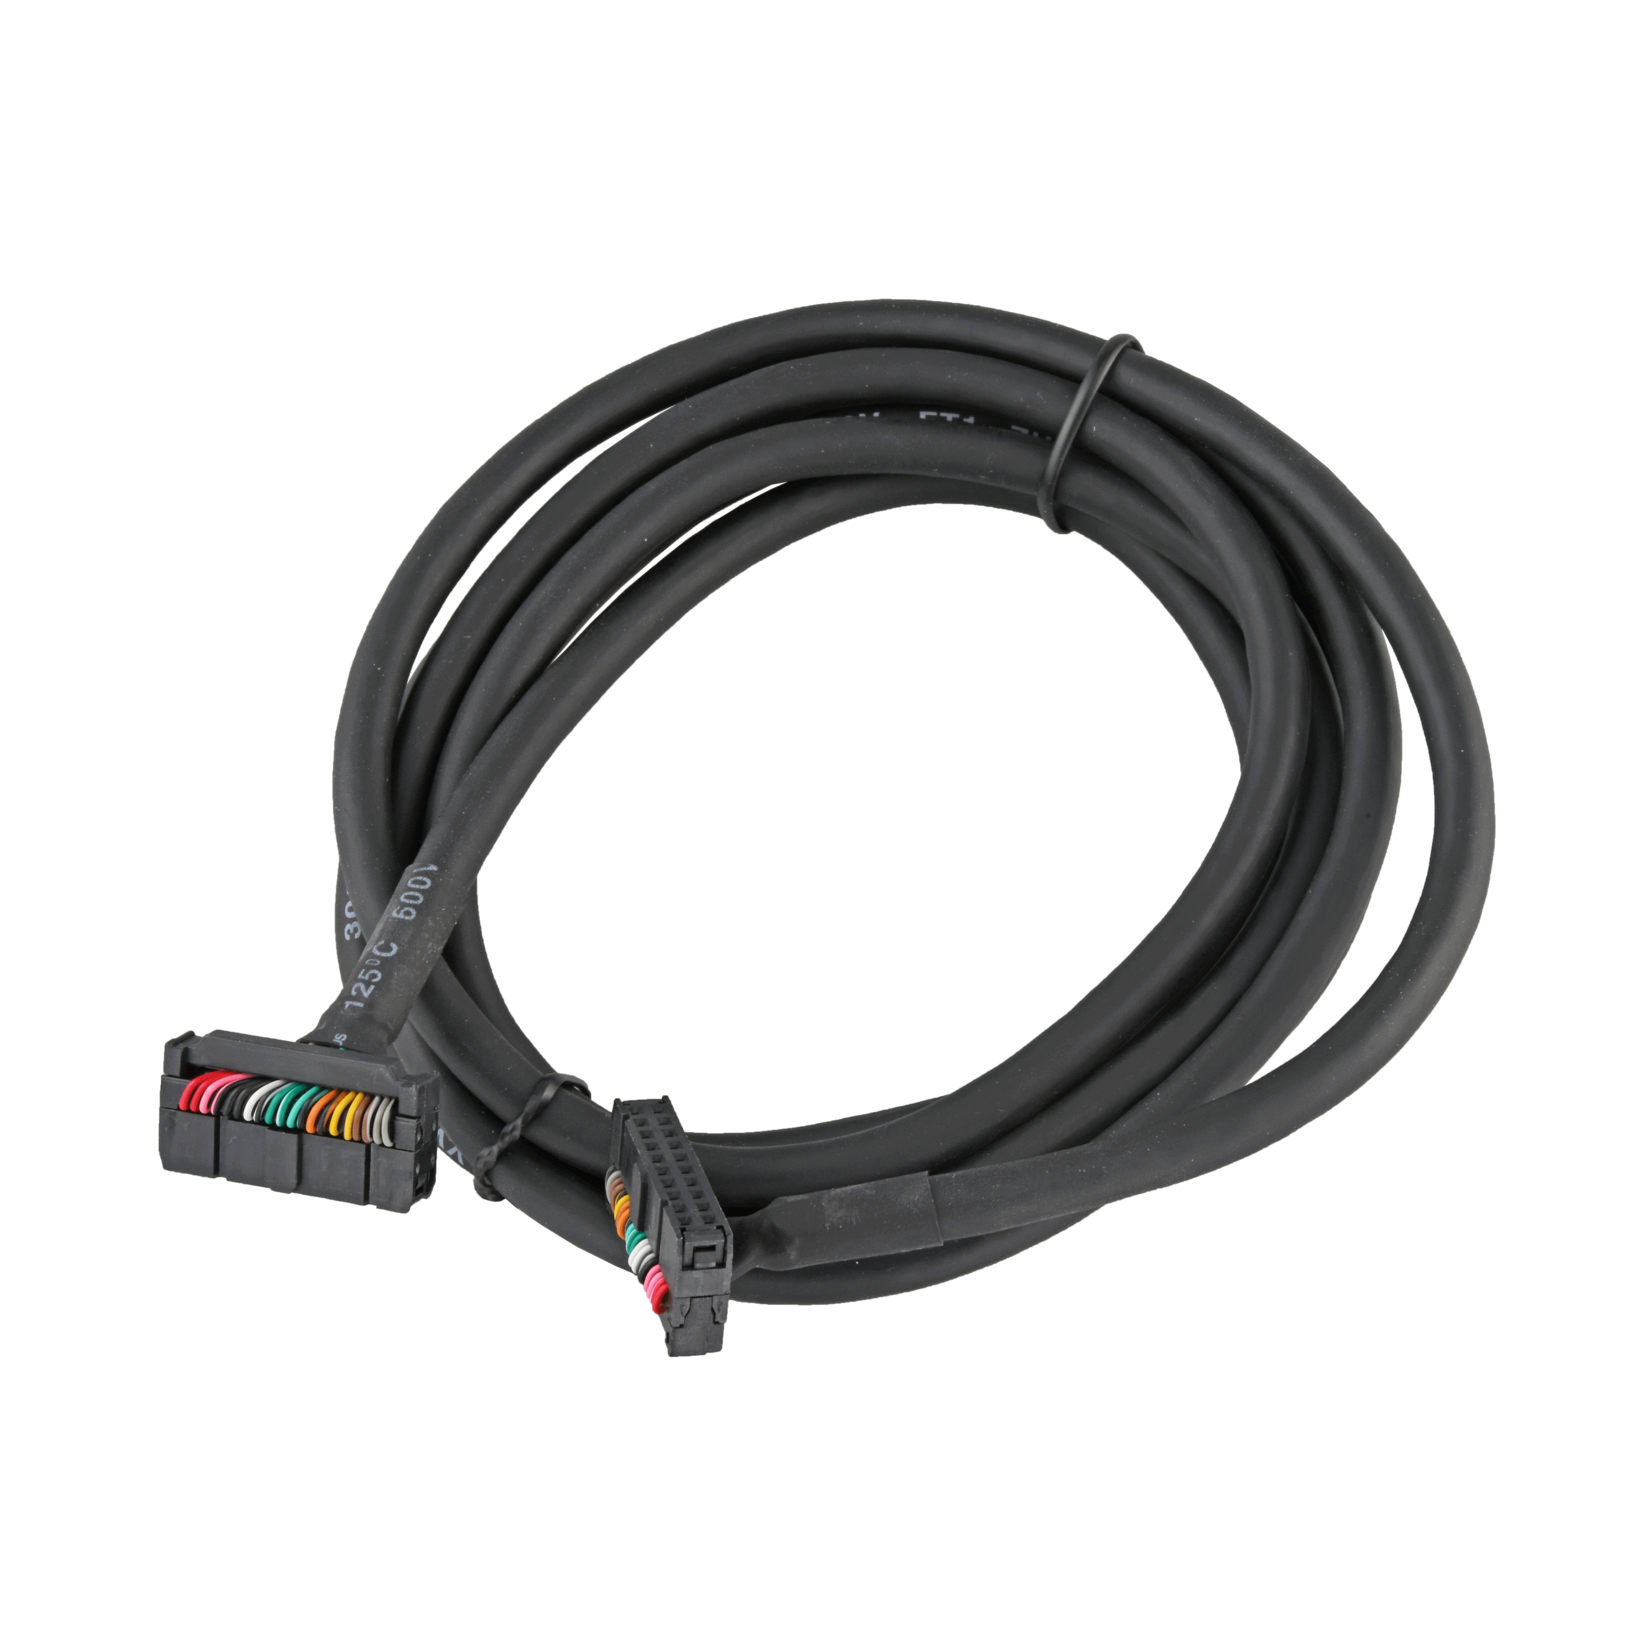 Wanhao Wanhao D9 300/400 20 Pin Cable